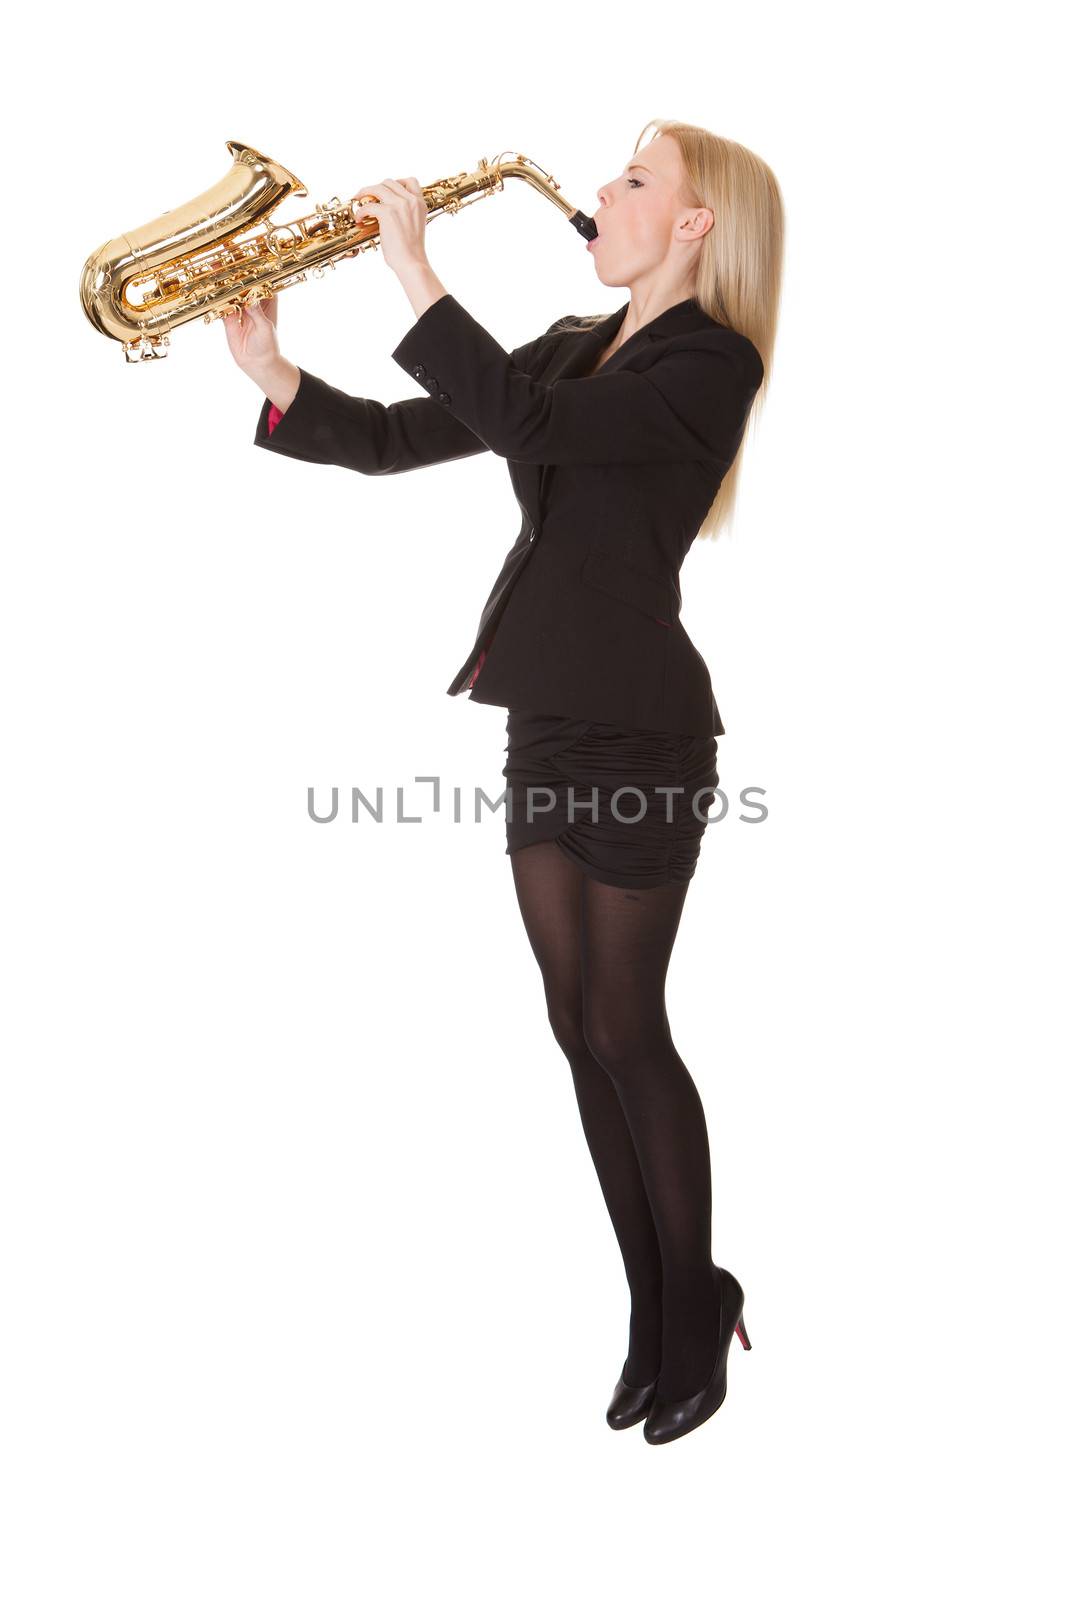 Beautiful young woman playing saxophone by AndreyPopov